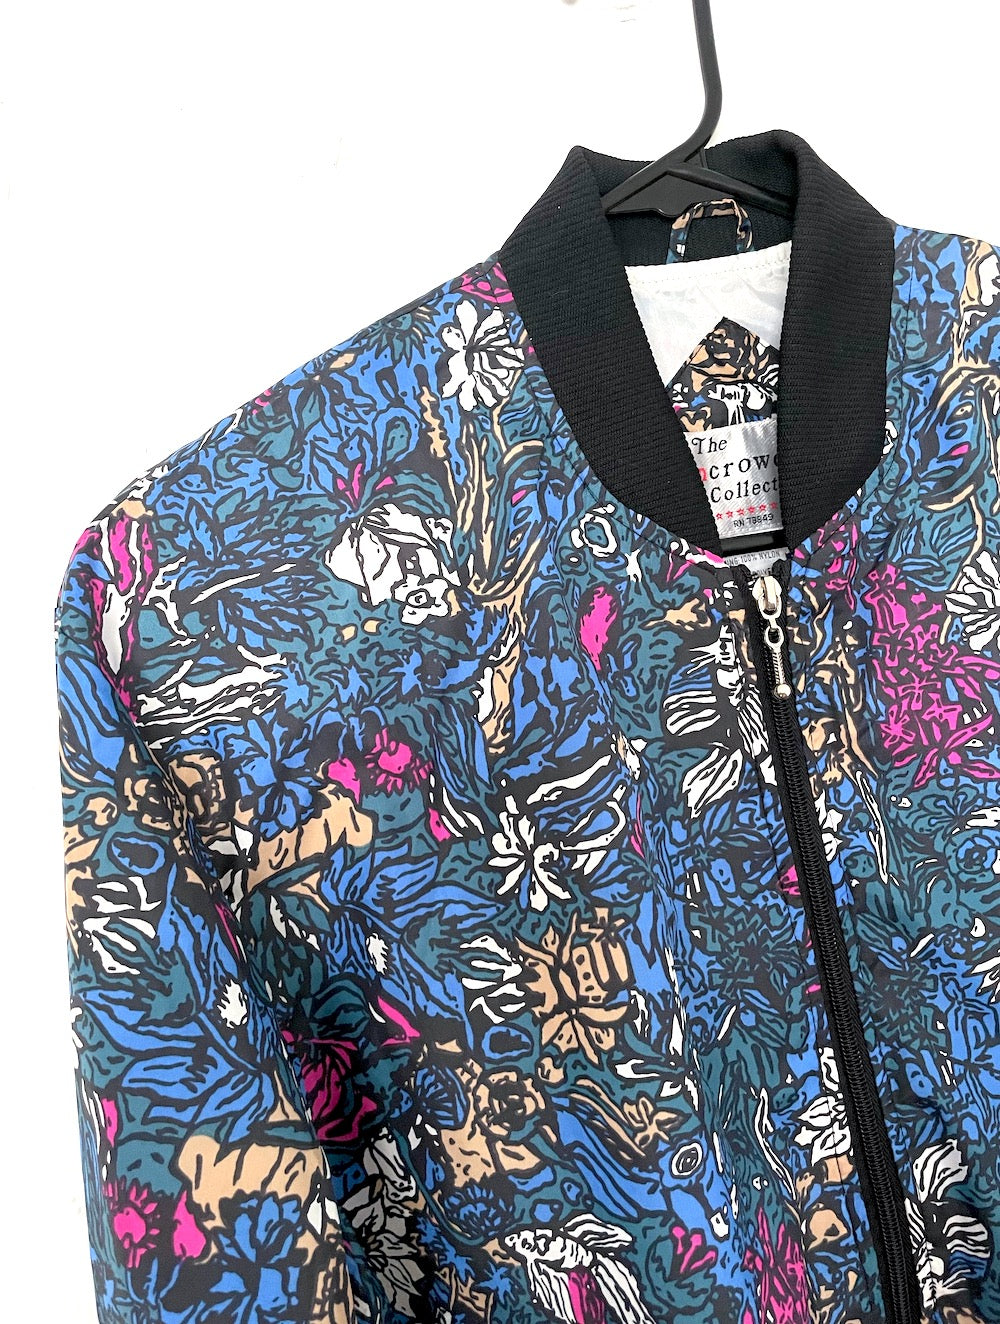 Givenchy Printed Bomber Jacket (Floral and Fire Print): ASO